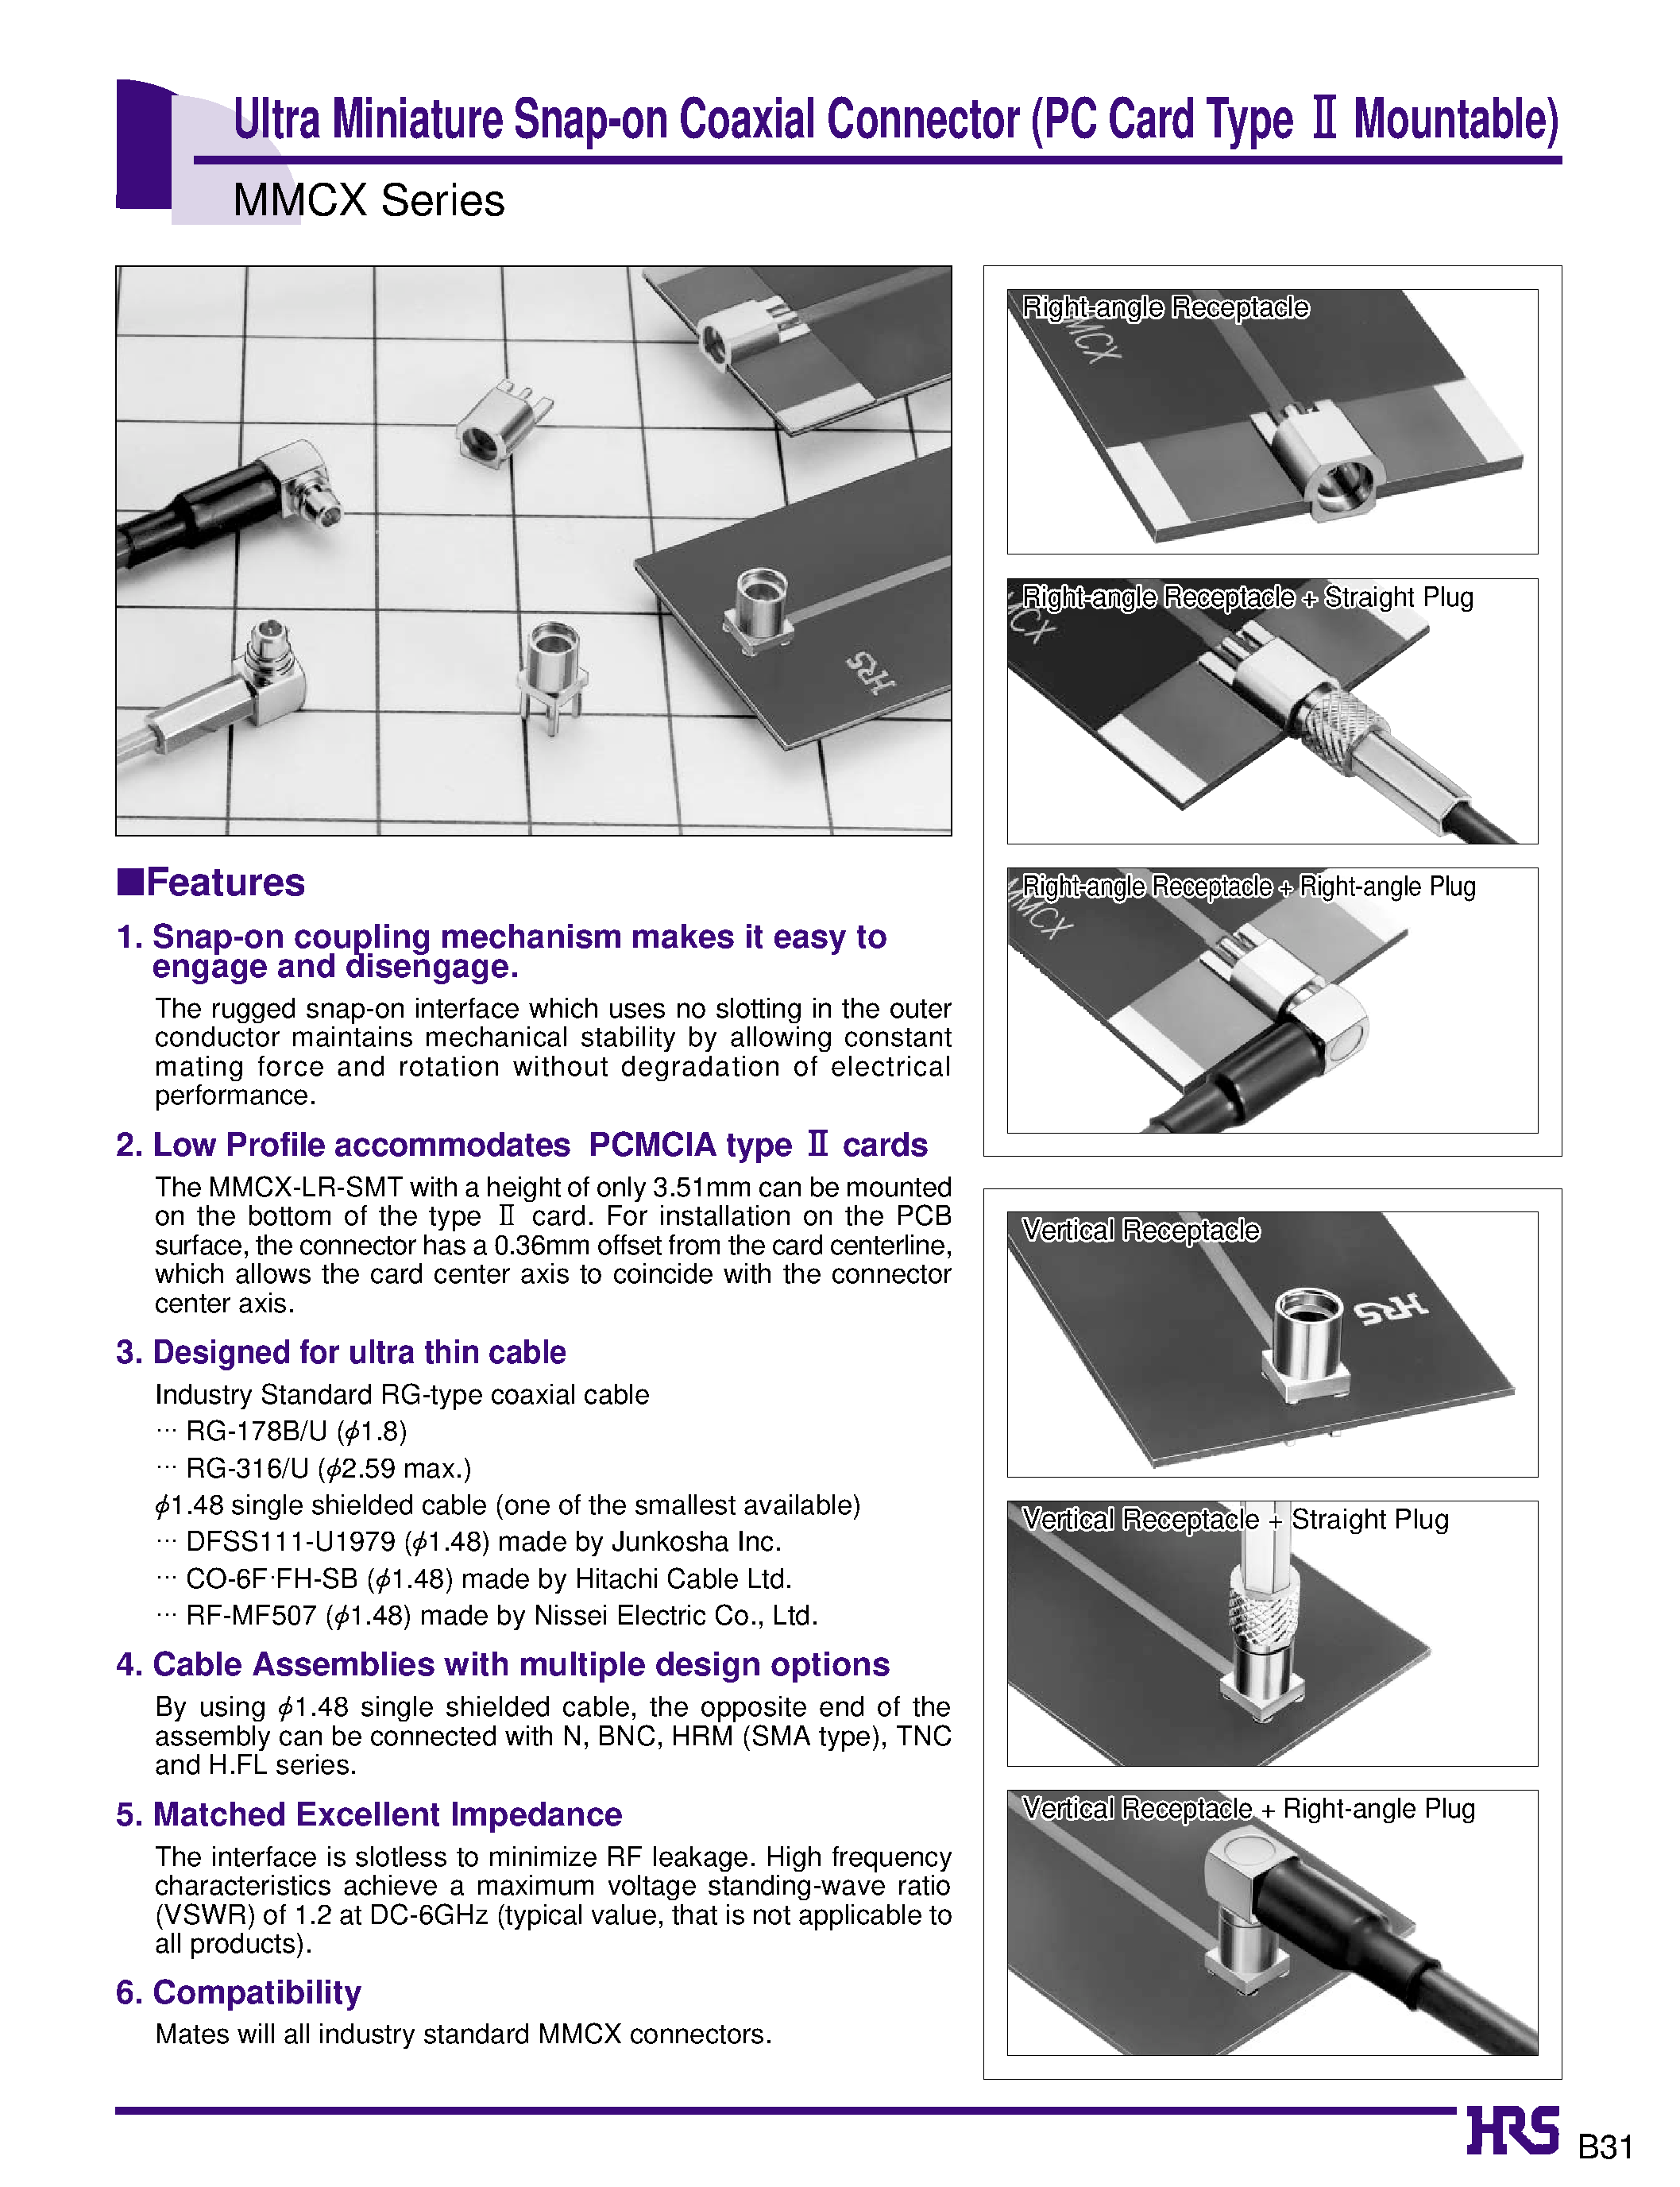 Datasheet MMCX-P-316/U - Ultra Miniature Snap-on Coaxial Connector (PC Card Type 2 Mountable) page 1